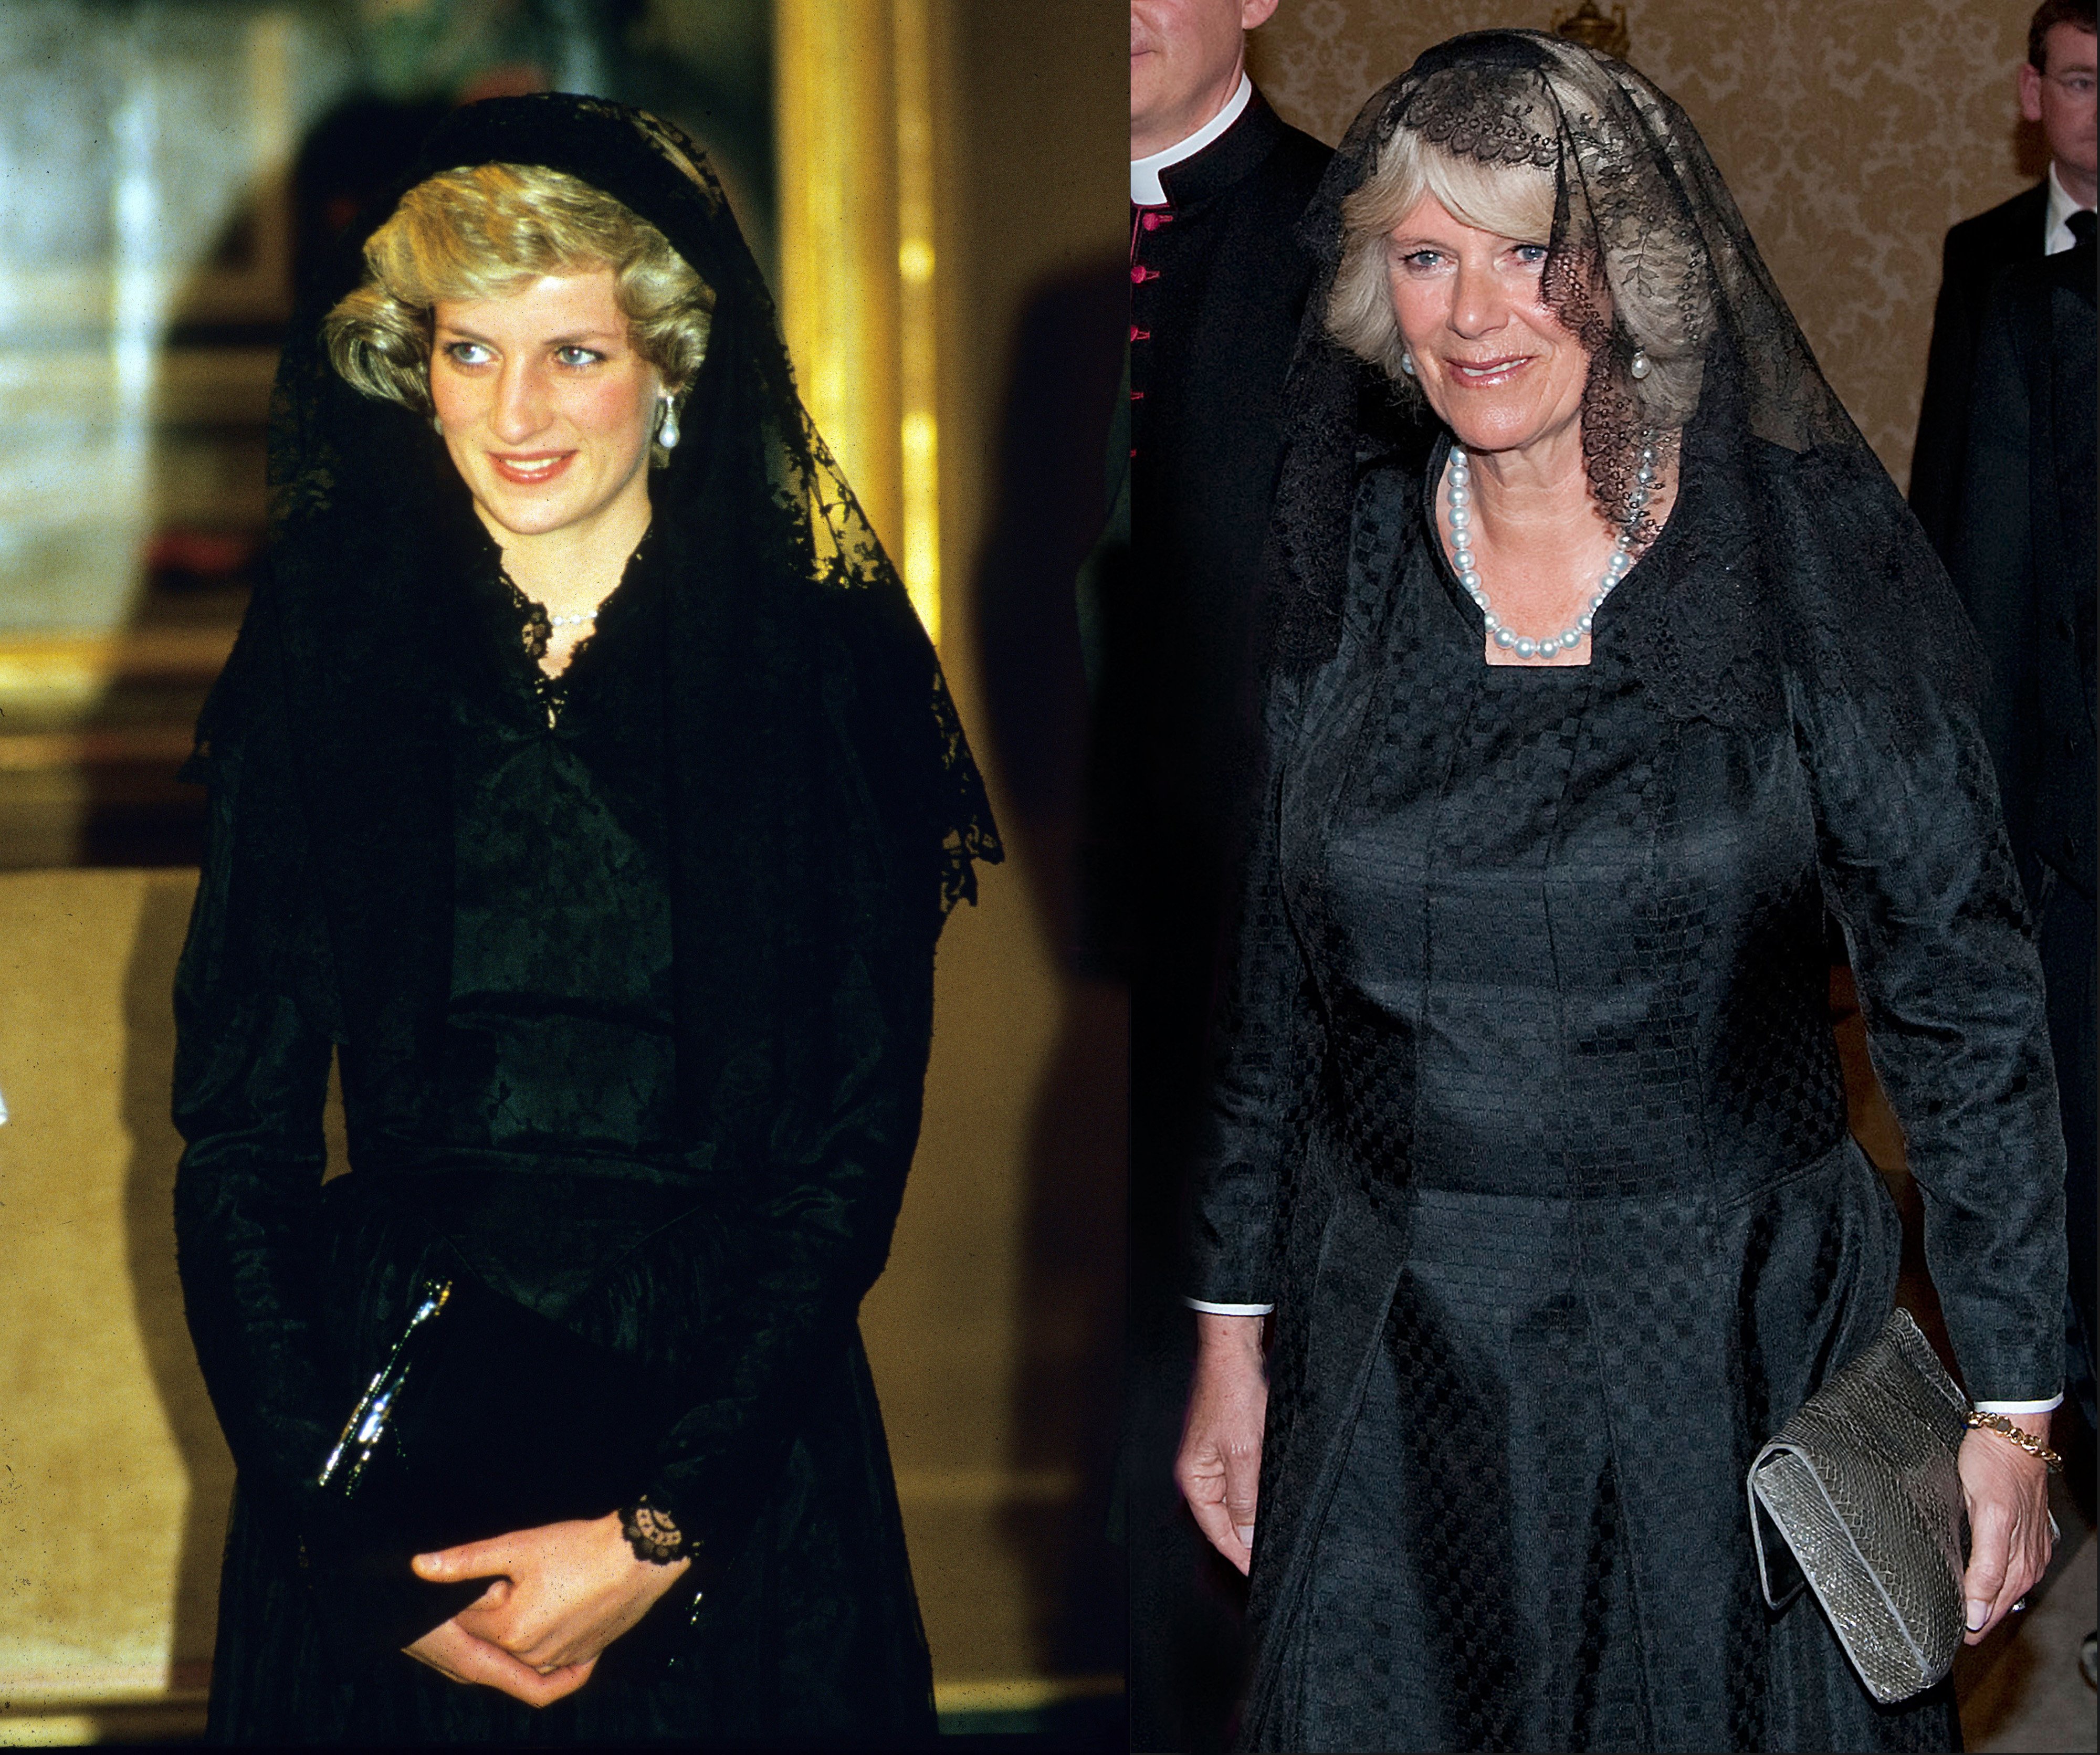 Diana, Princess of Wales as she arrives at the Vatican to meet Pope Paul II in April 1985 and (right) Camilla, Duchess of Cornwall meeting Pope Benedict XVI at St. Peter's Basilica on April 27, 2009 | Photo: Getty Images